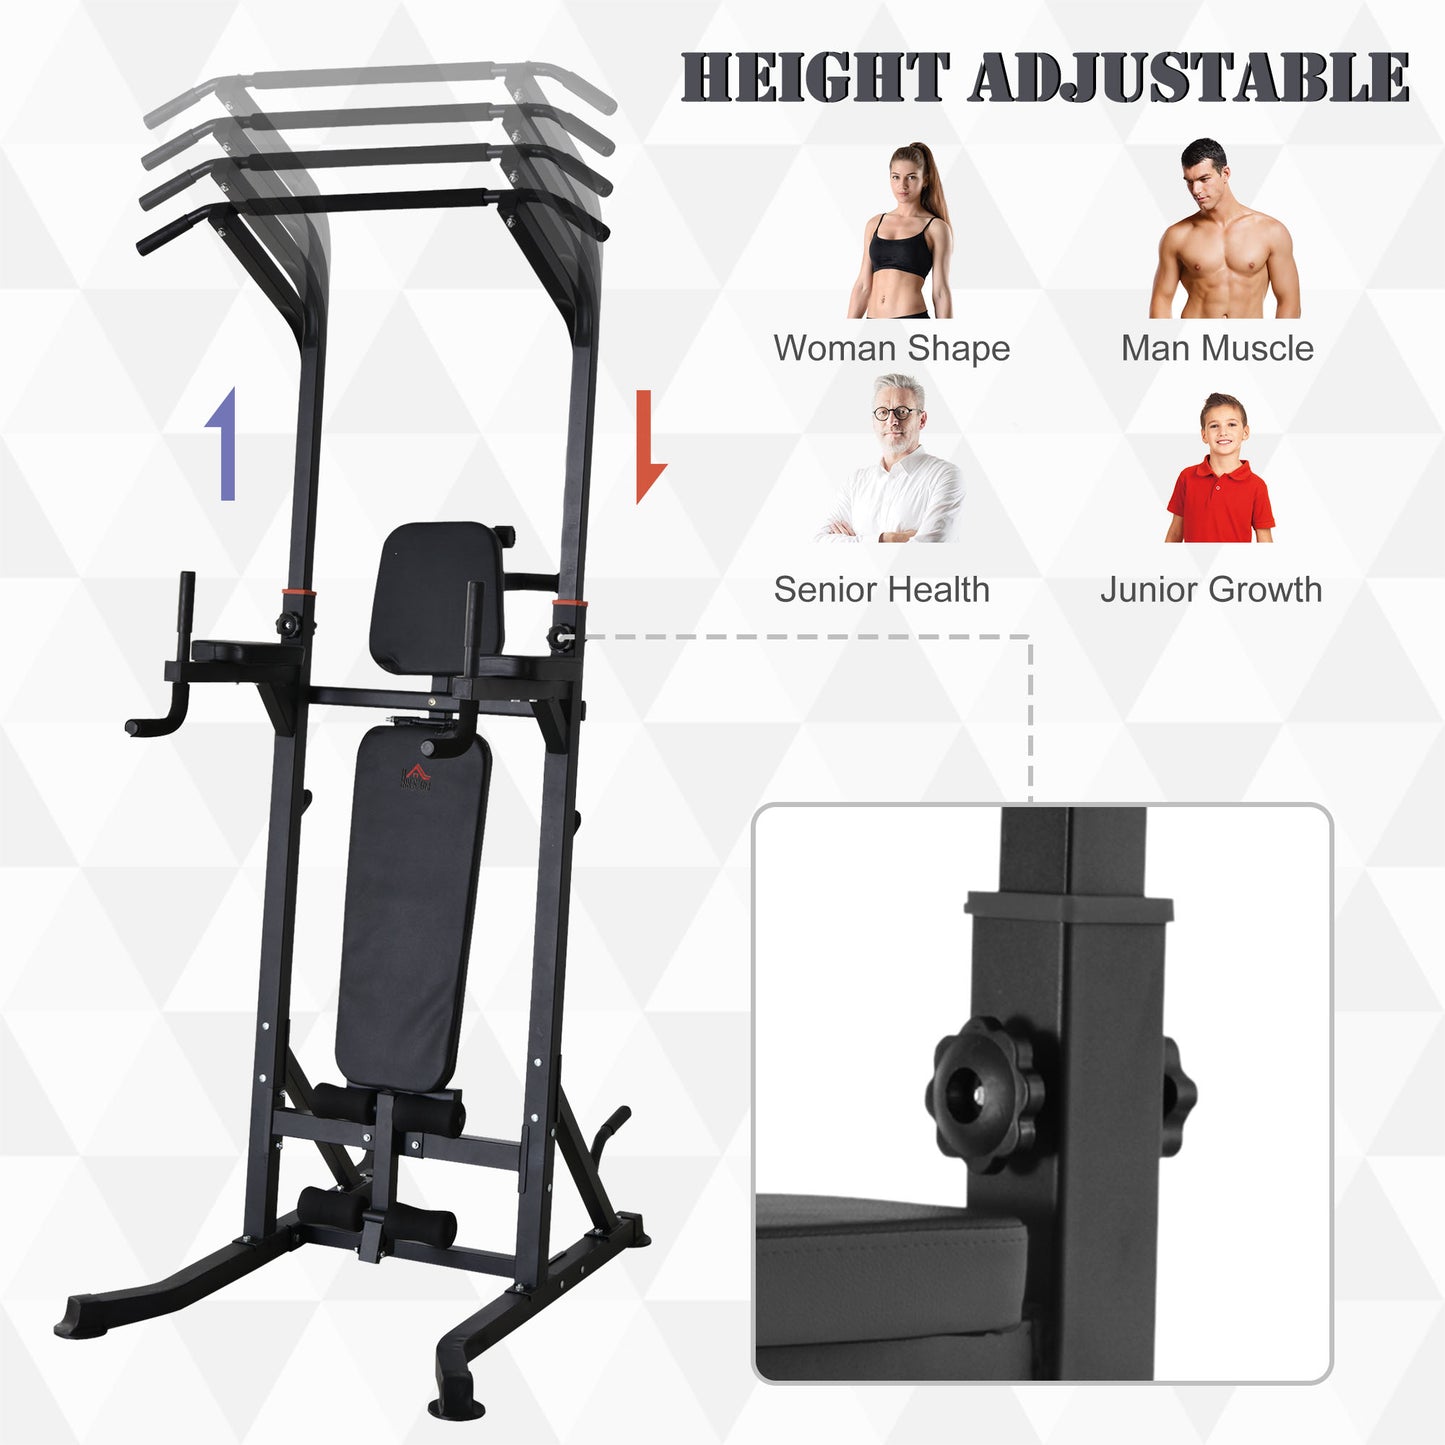 HOMCOM Adjustable&Folded Dip Stands Multi-Function Pull-ups Sit-ups, Fitness tools Gym Home